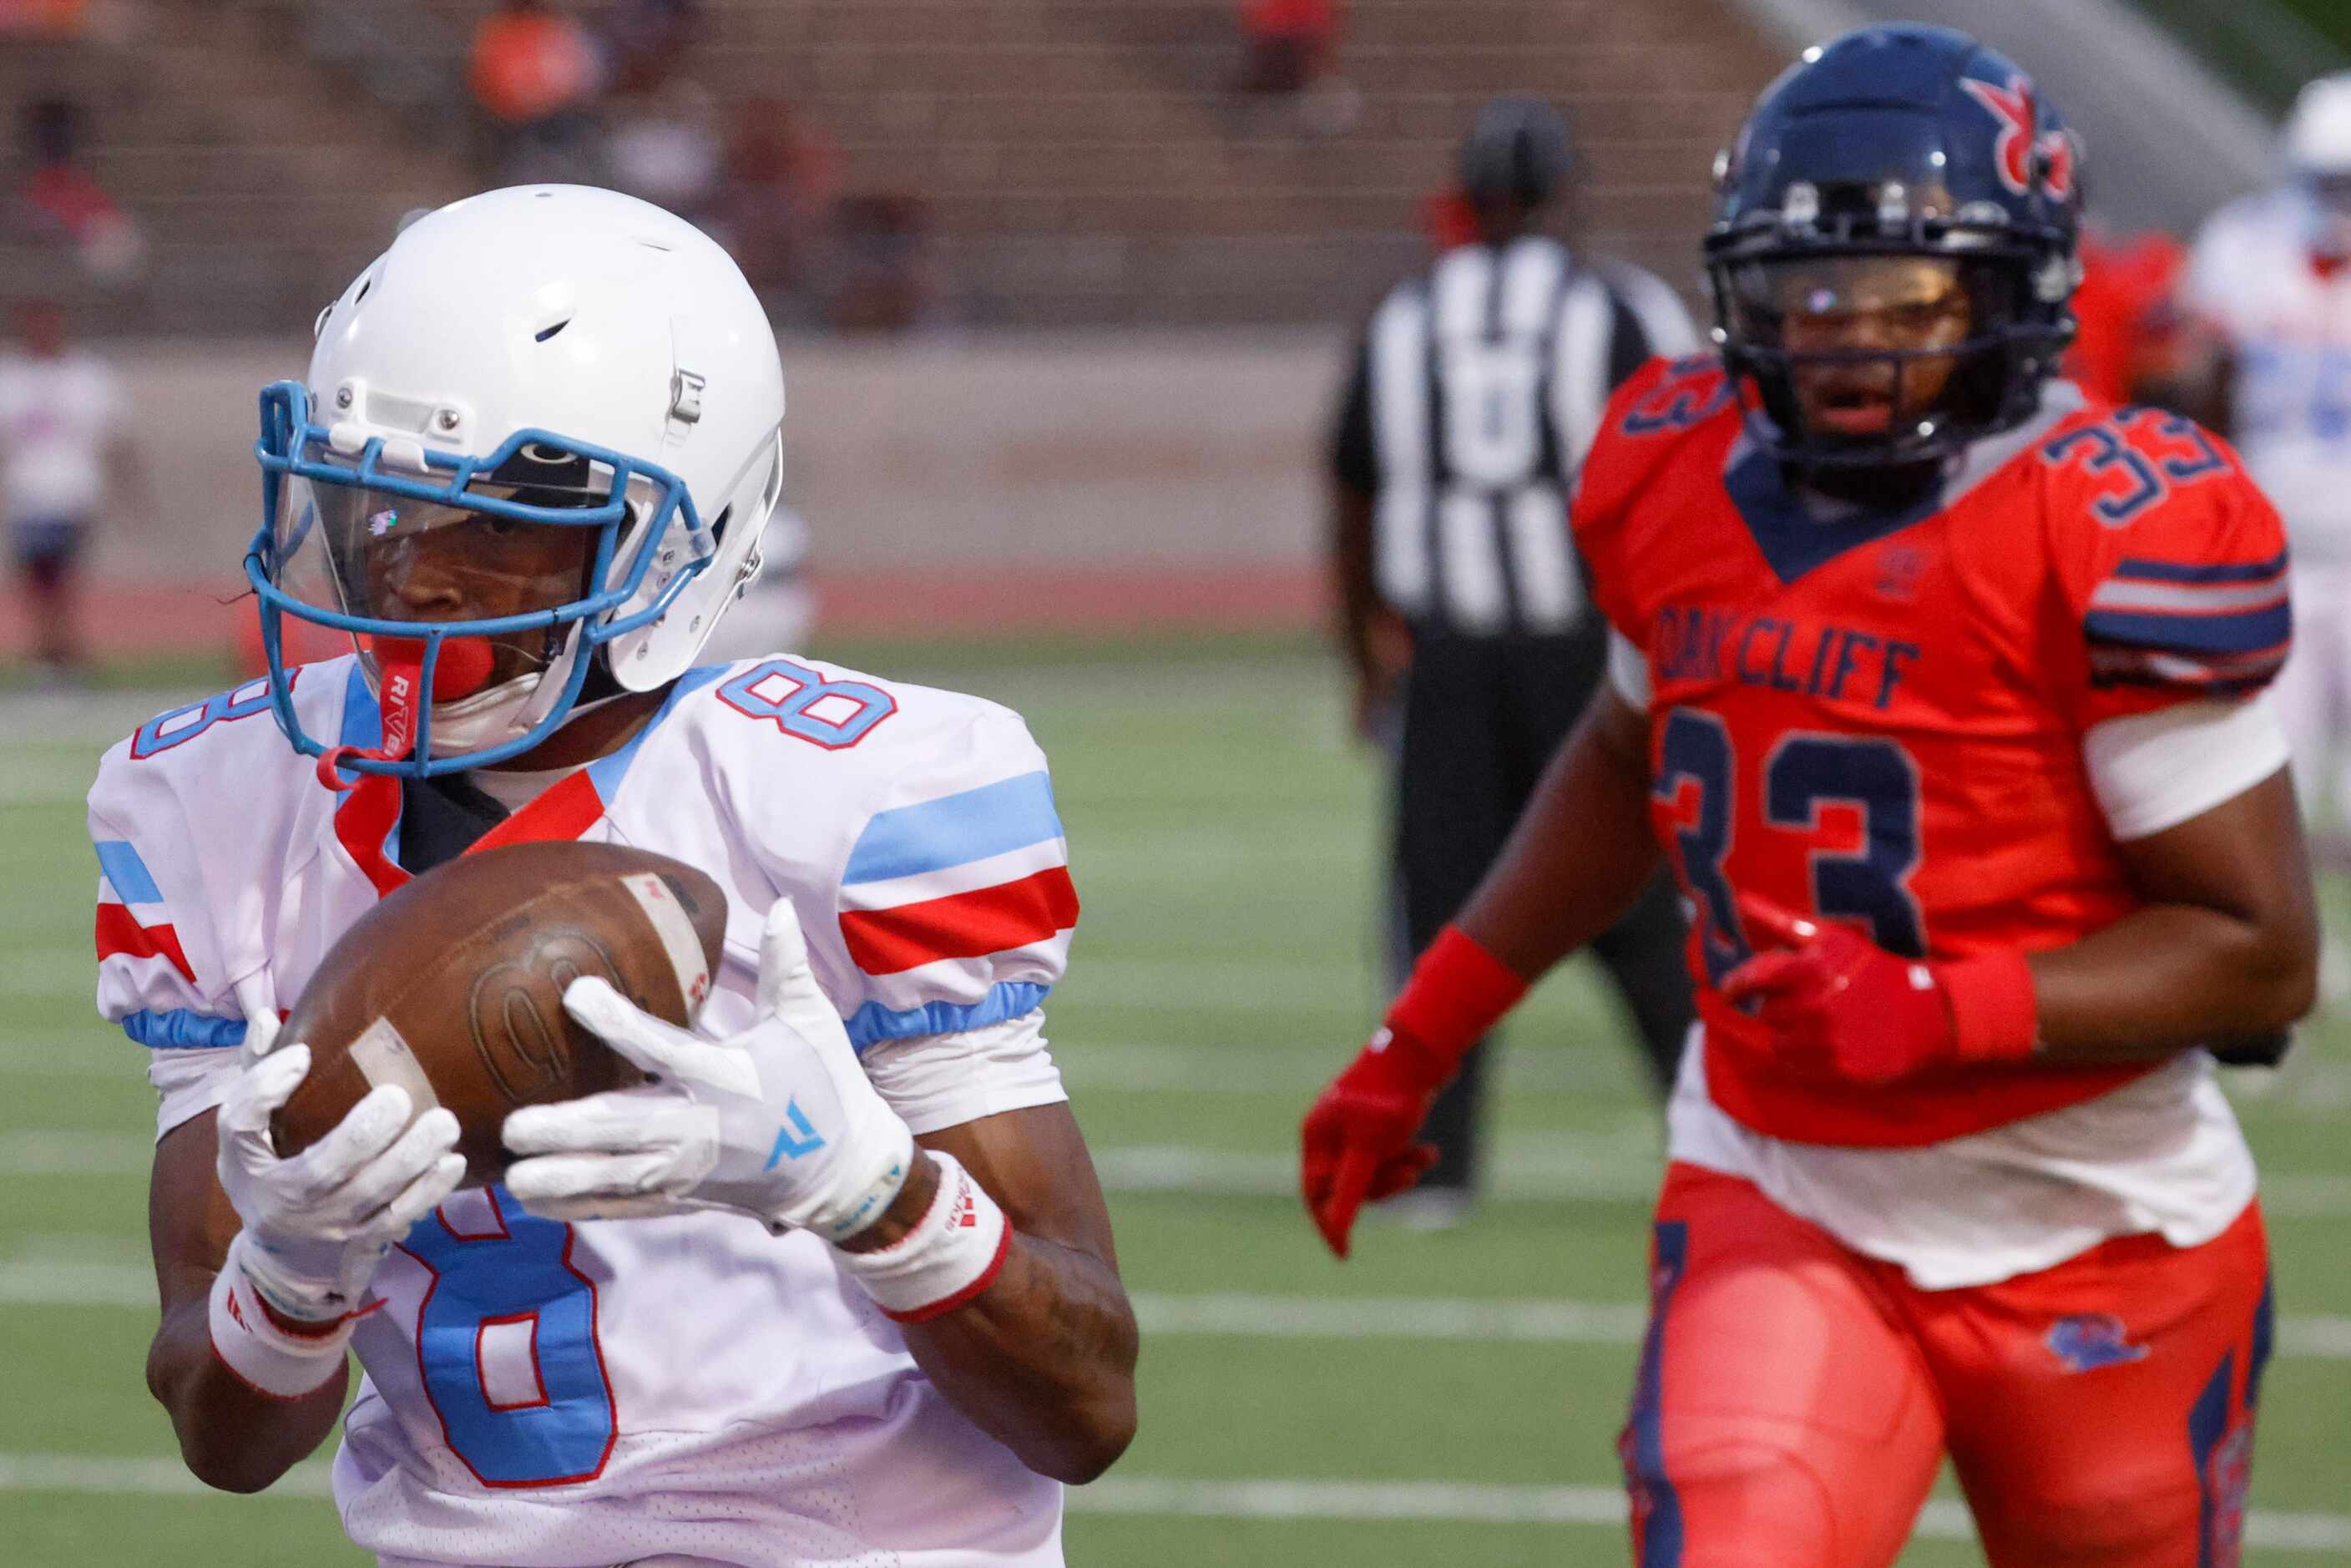 Carter High’s O’ryan Wallace (8) makes a touchdown past Kimball High’s Llyod Lewis during...